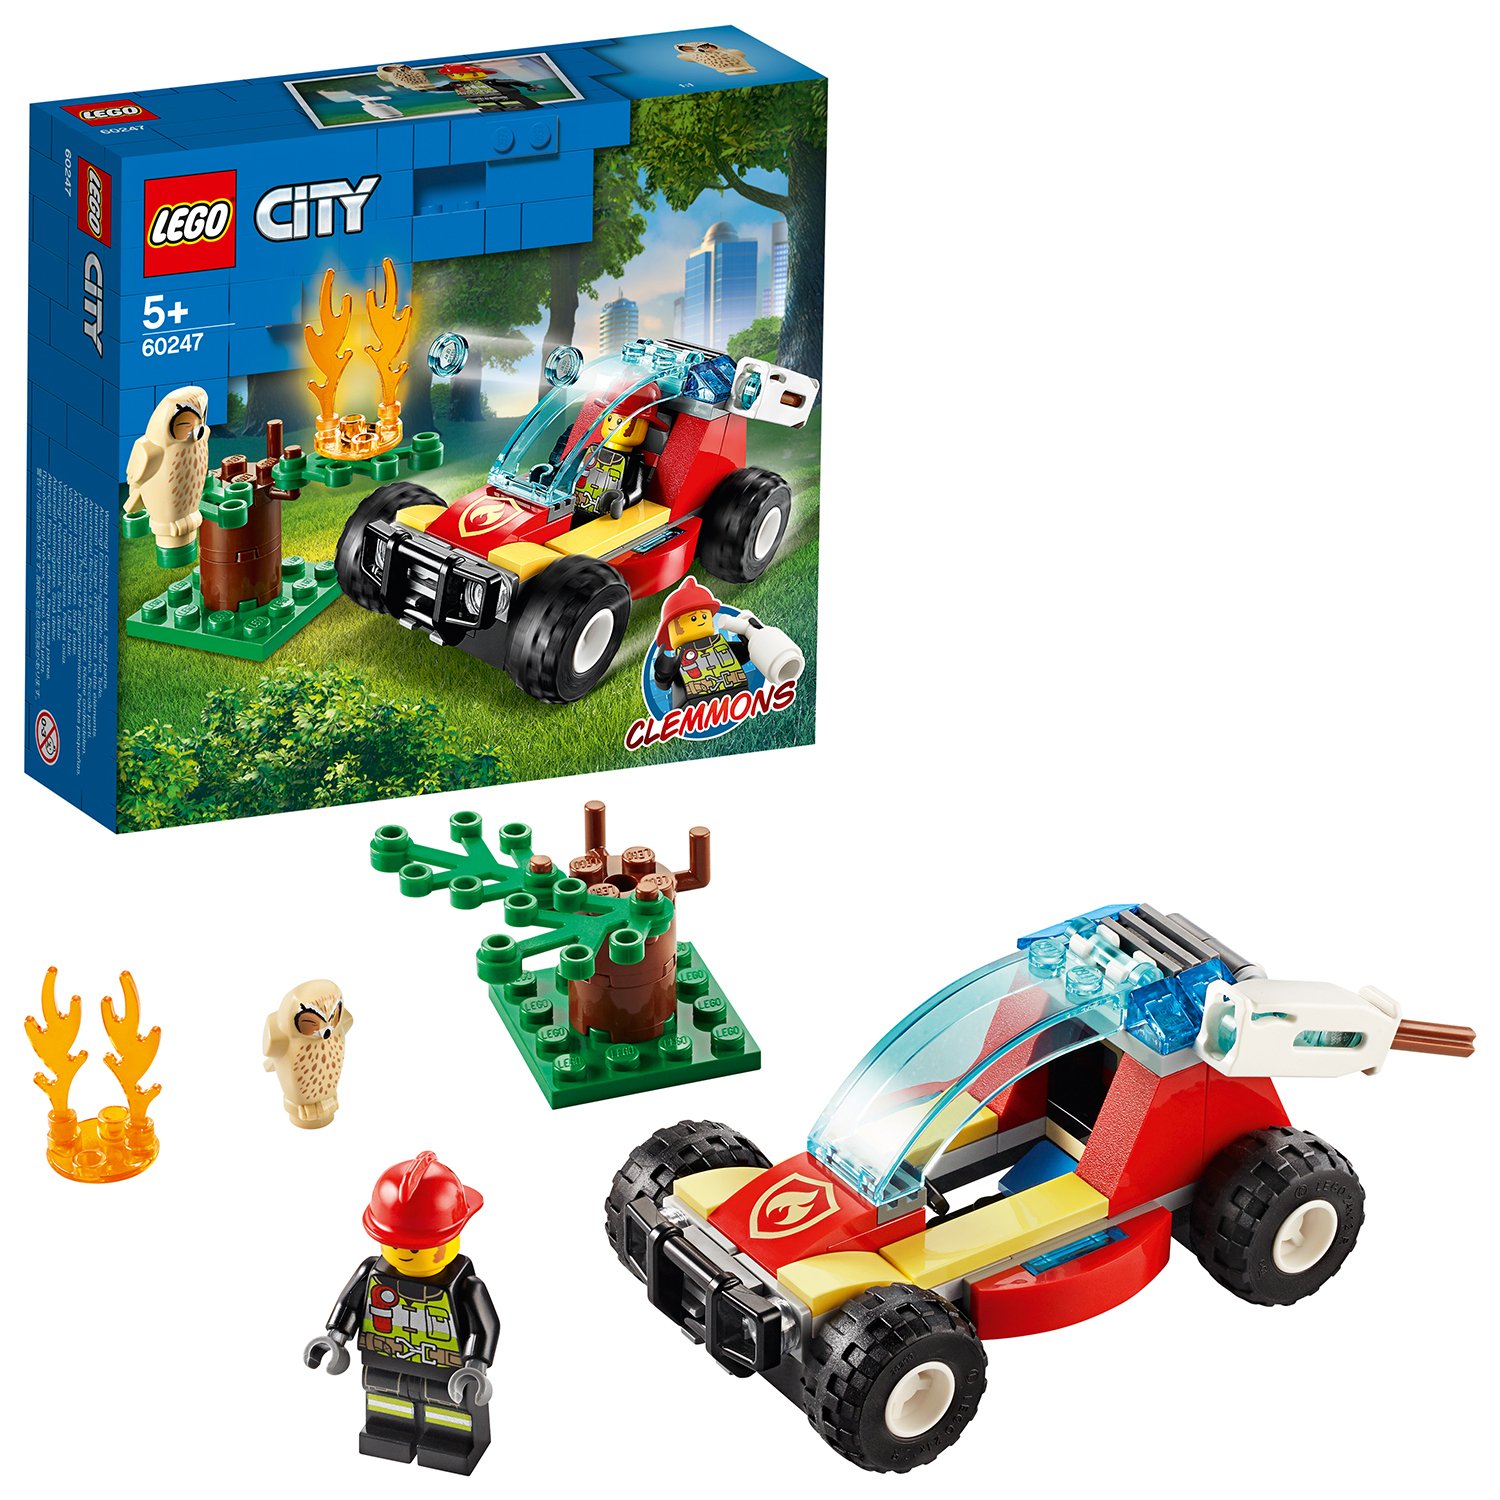 LEGO City Forest Fire Response Buggy Building Set Review